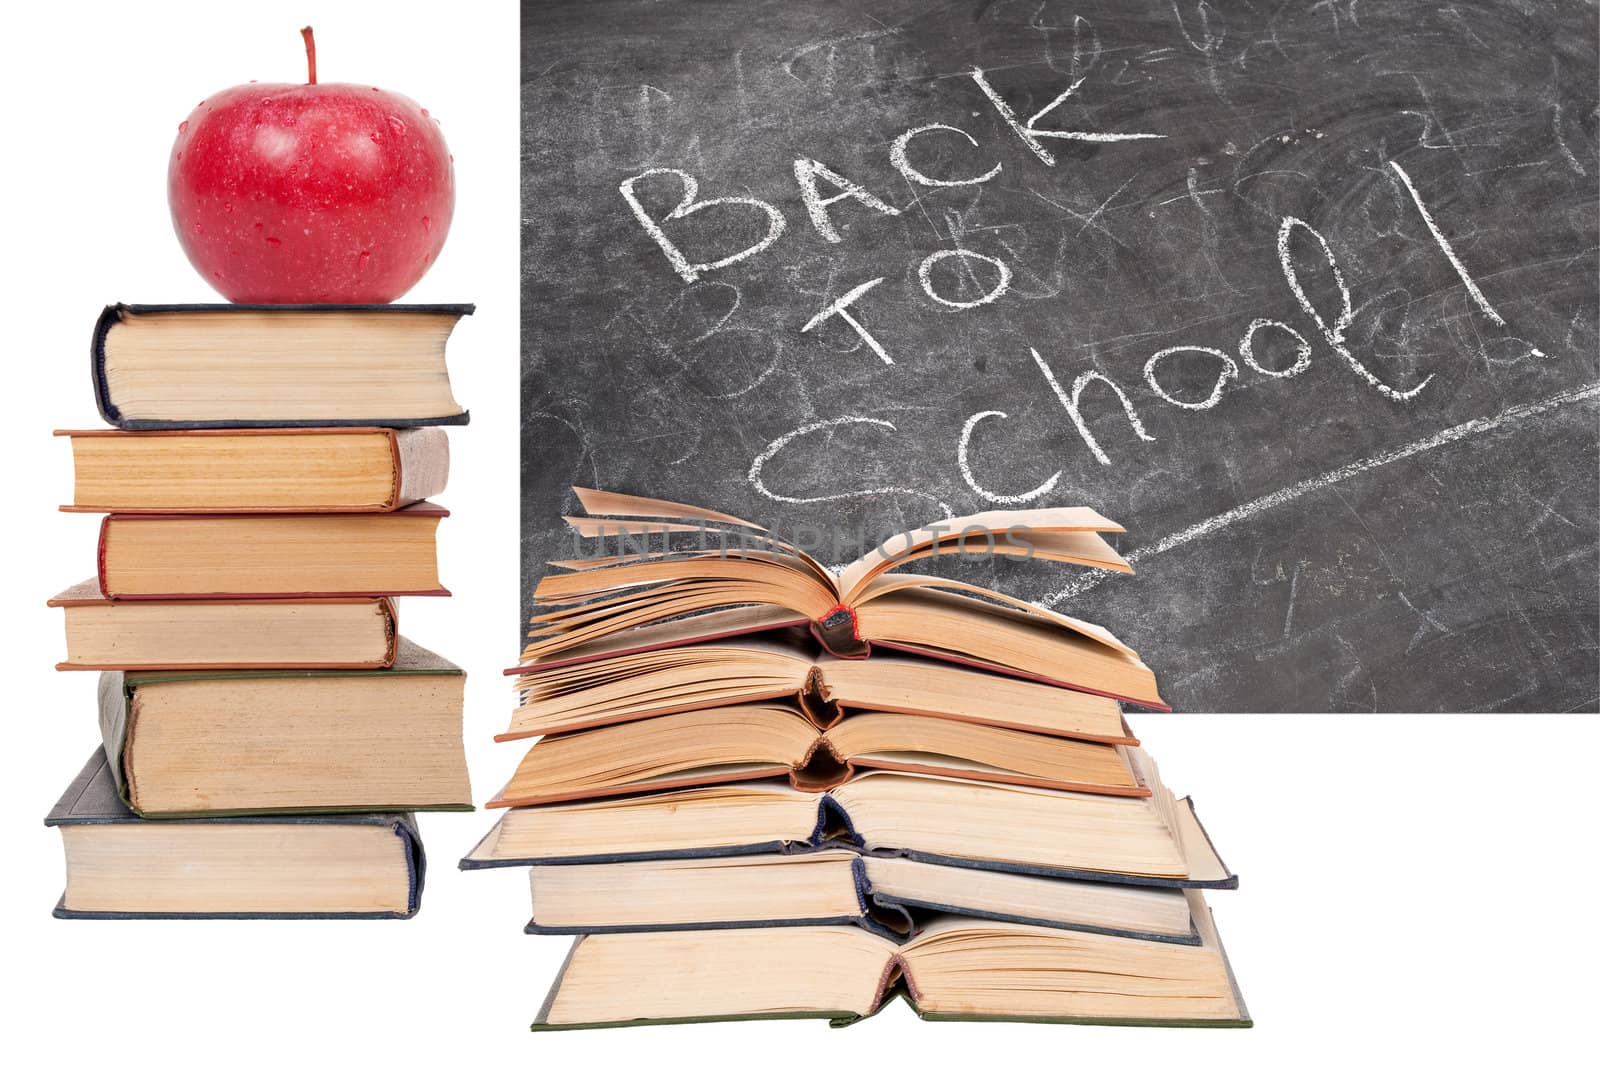 Back to School written on a blackboard with books and red apple  by SeDmi